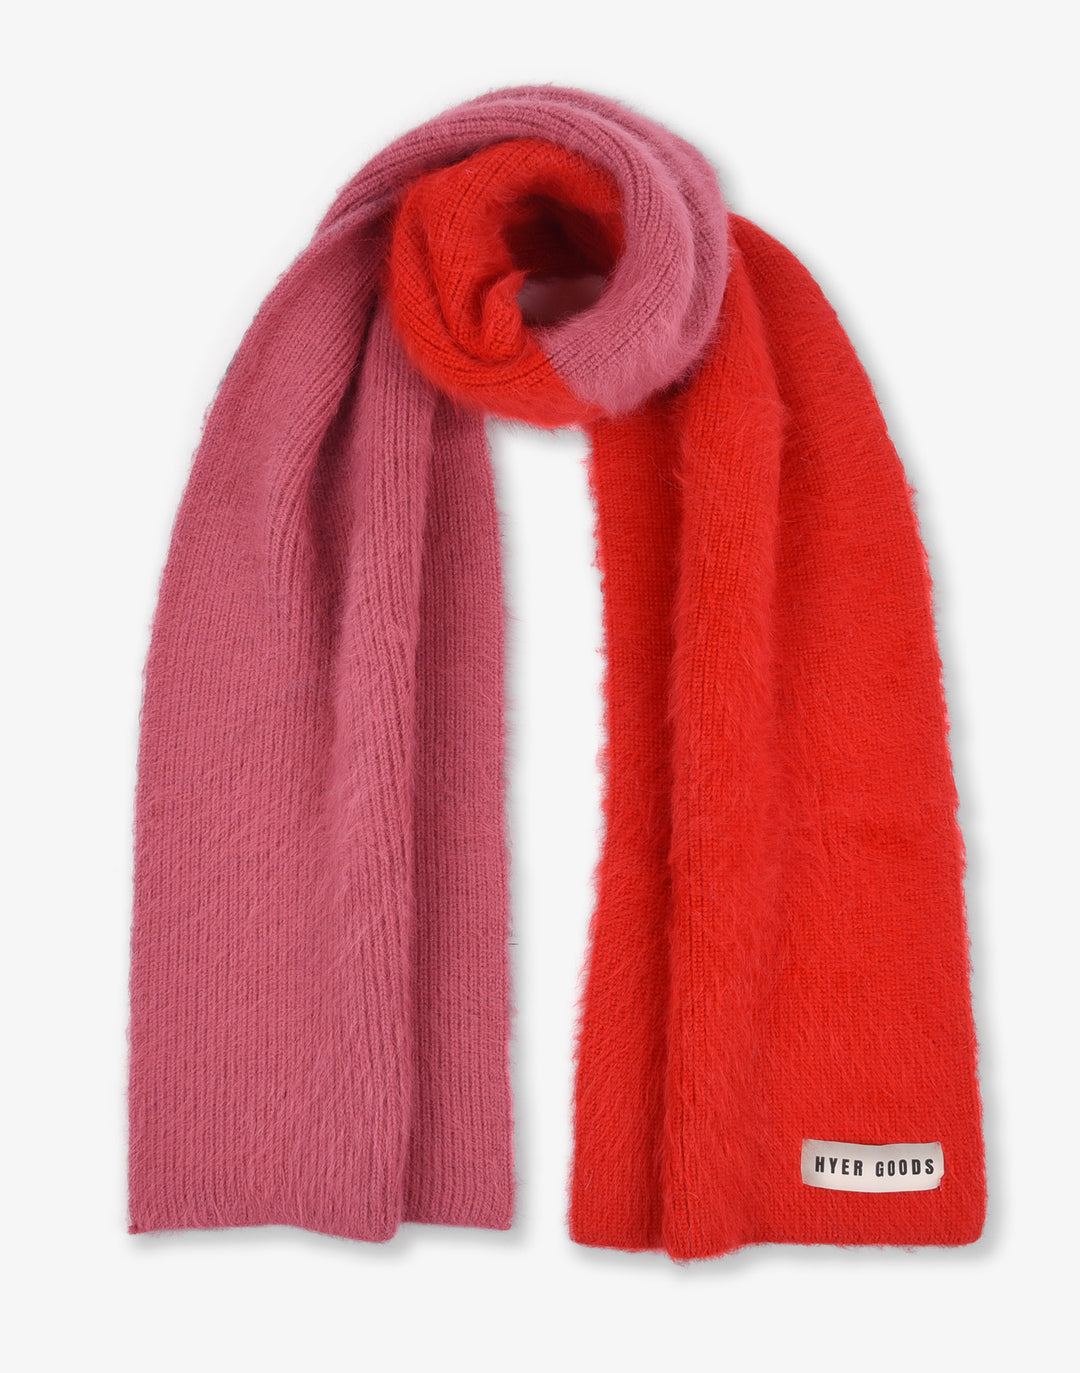 hyer goods upcycled angora scarf pink red colorblock scarf #color_red-colorblock